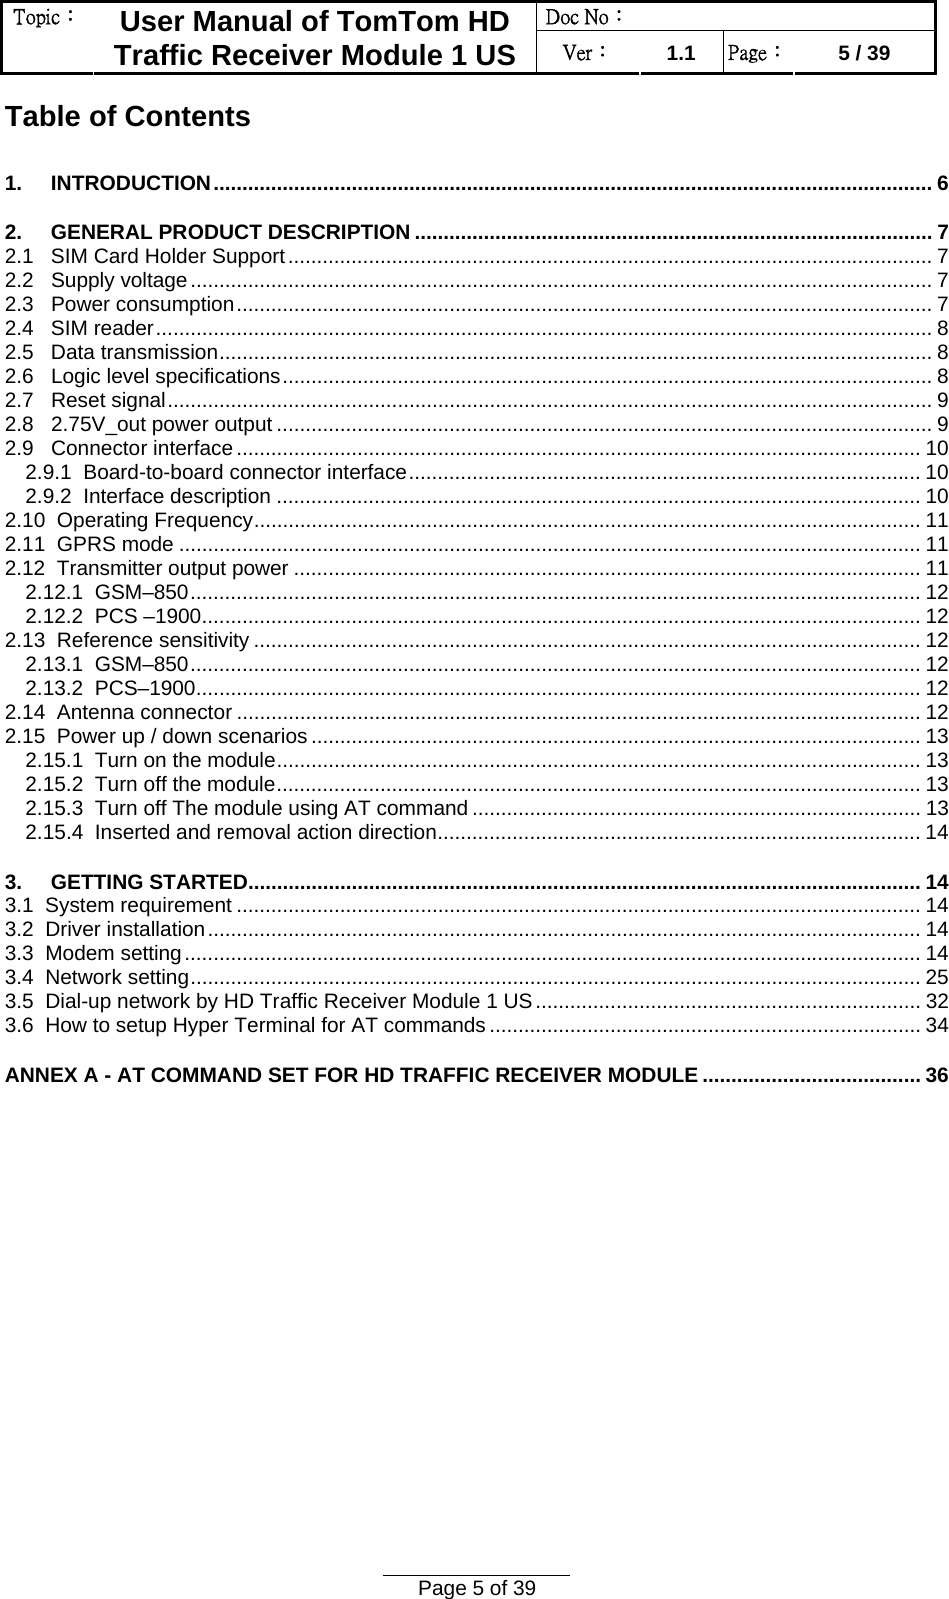 Doc No：  Topic：  User Manual of TomTom HD Traffic Receiver Module 1 US  Ver：  1.1  Page：  5 / 39  Page 5 of 39  Table of Contents 1.     INTRODUCTION............................................................................................................................. 6 2.     GENERAL PRODUCT DESCRIPTION .......................................................................................... 7 2.1   SIM Card Holder Support................................................................................................................ 7 2.2   Supply voltage................................................................................................................................. 7 2.3   Power consumption......................................................................................................................... 7 2.4   SIM reader....................................................................................................................................... 8 2.5   Data transmission............................................................................................................................ 8 2.6   Logic level specifications................................................................................................................. 8 2.7   Reset signal..................................................................................................................................... 9 2.8   2.75V_out power output .................................................................................................................. 9 2.9   Connector interface....................................................................................................................... 10 2.9.1  Board-to-board connector interface......................................................................................... 10 2.9.2  Interface description ................................................................................................................ 10 2.10  Operating Frequency.................................................................................................................... 11 2.11  GPRS mode ................................................................................................................................. 11 2.12  Transmitter output power ............................................................................................................. 11 2.12.1  GSM–850............................................................................................................................... 12 2.12.2  PCS –1900............................................................................................................................. 12 2.13  Reference sensitivity .................................................................................................................... 12 2.13.1  GSM–850............................................................................................................................... 12 2.13.2  PCS–1900.............................................................................................................................. 12 2.14  Antenna connector ....................................................................................................................... 12 2.15  Power up / down scenarios .......................................................................................................... 13 2.15.1  Turn on the module................................................................................................................ 13 2.15.2  Turn off the module................................................................................................................ 13 2.15.3  Turn off The module using AT command .............................................................................. 13 2.15.4  Inserted and removal action direction.................................................................................... 14 3.     GETTING STARTED..................................................................................................................... 14 3.1  System requirement ....................................................................................................................... 14 3.2  Driver installation............................................................................................................................ 14 3.3  Modem setting................................................................................................................................ 14 3.4  Network setting............................................................................................................................... 25 3.5  Dial-up network by HD Traffic Receiver Module 1 US................................................................... 32 3.6  How to setup Hyper Terminal for AT commands ........................................................................... 34 ANNEX A - AT COMMAND SET FOR HD TRAFFIC RECEIVER MODULE ...................................... 36  